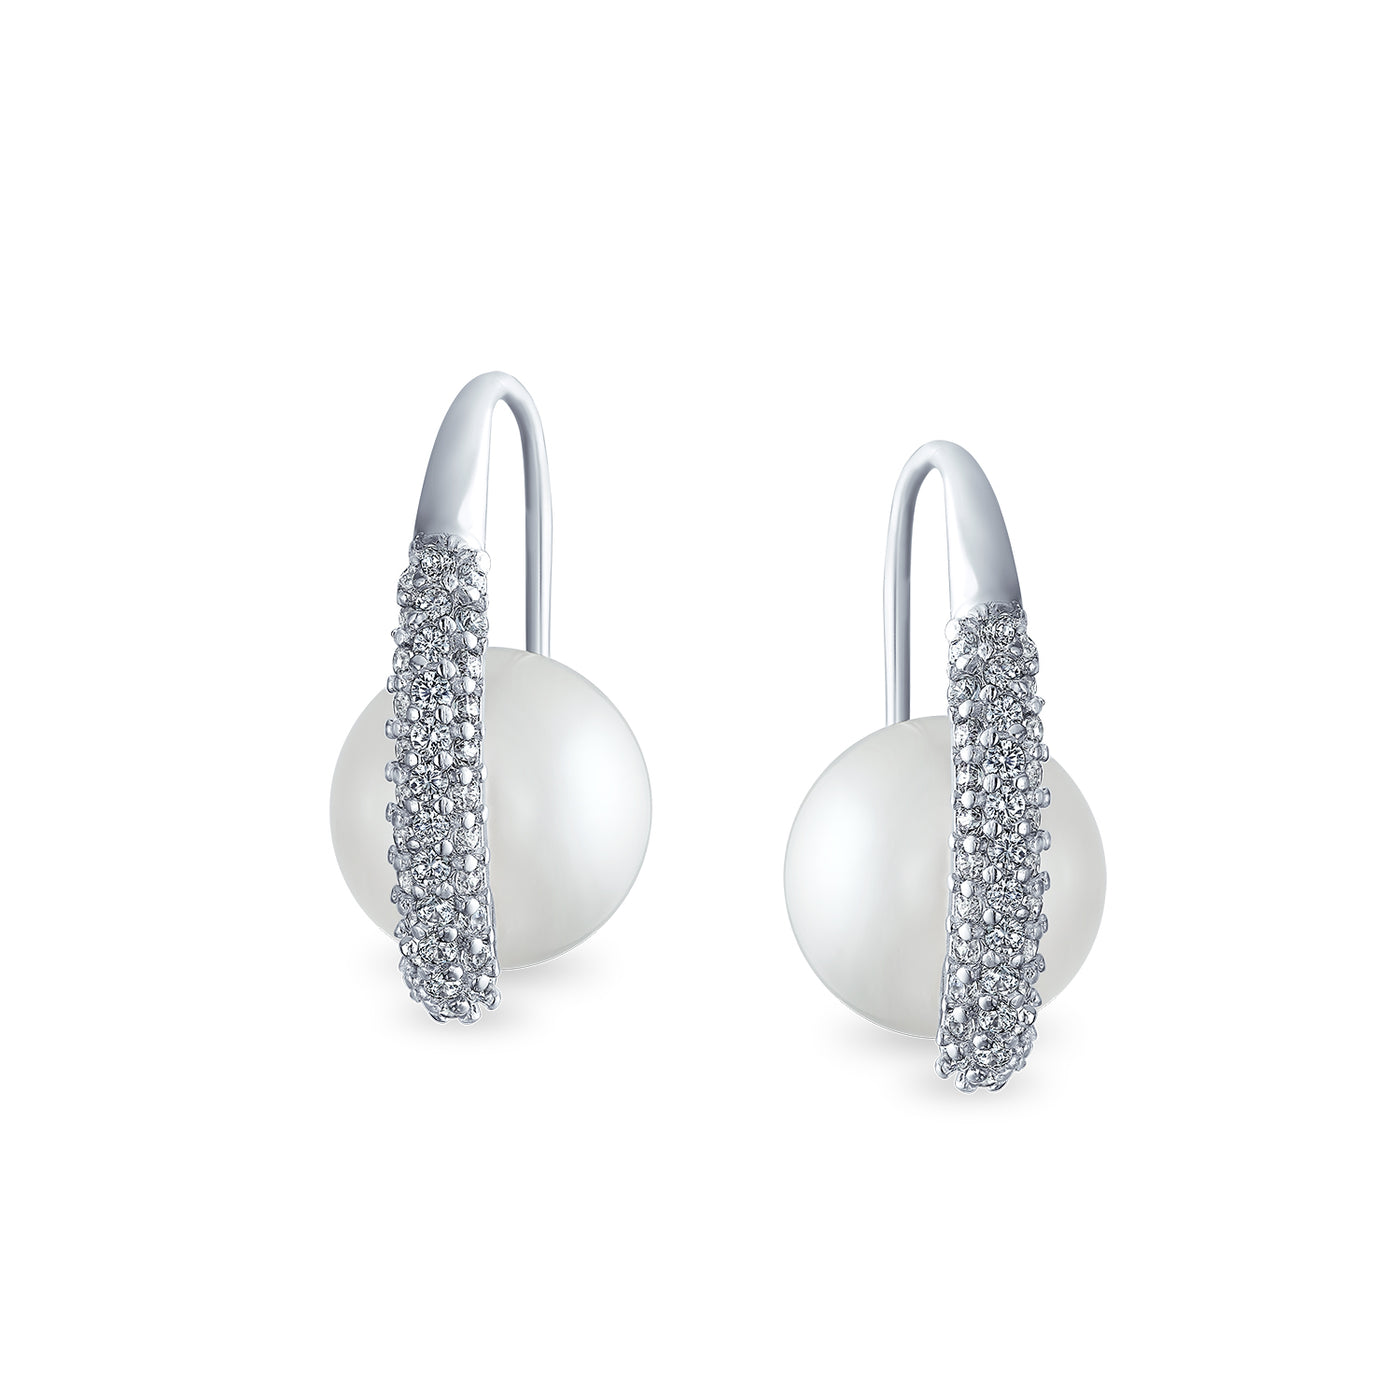 Bridal White CZ Wire Threader Imitation Pearl Earrings Silver Plated